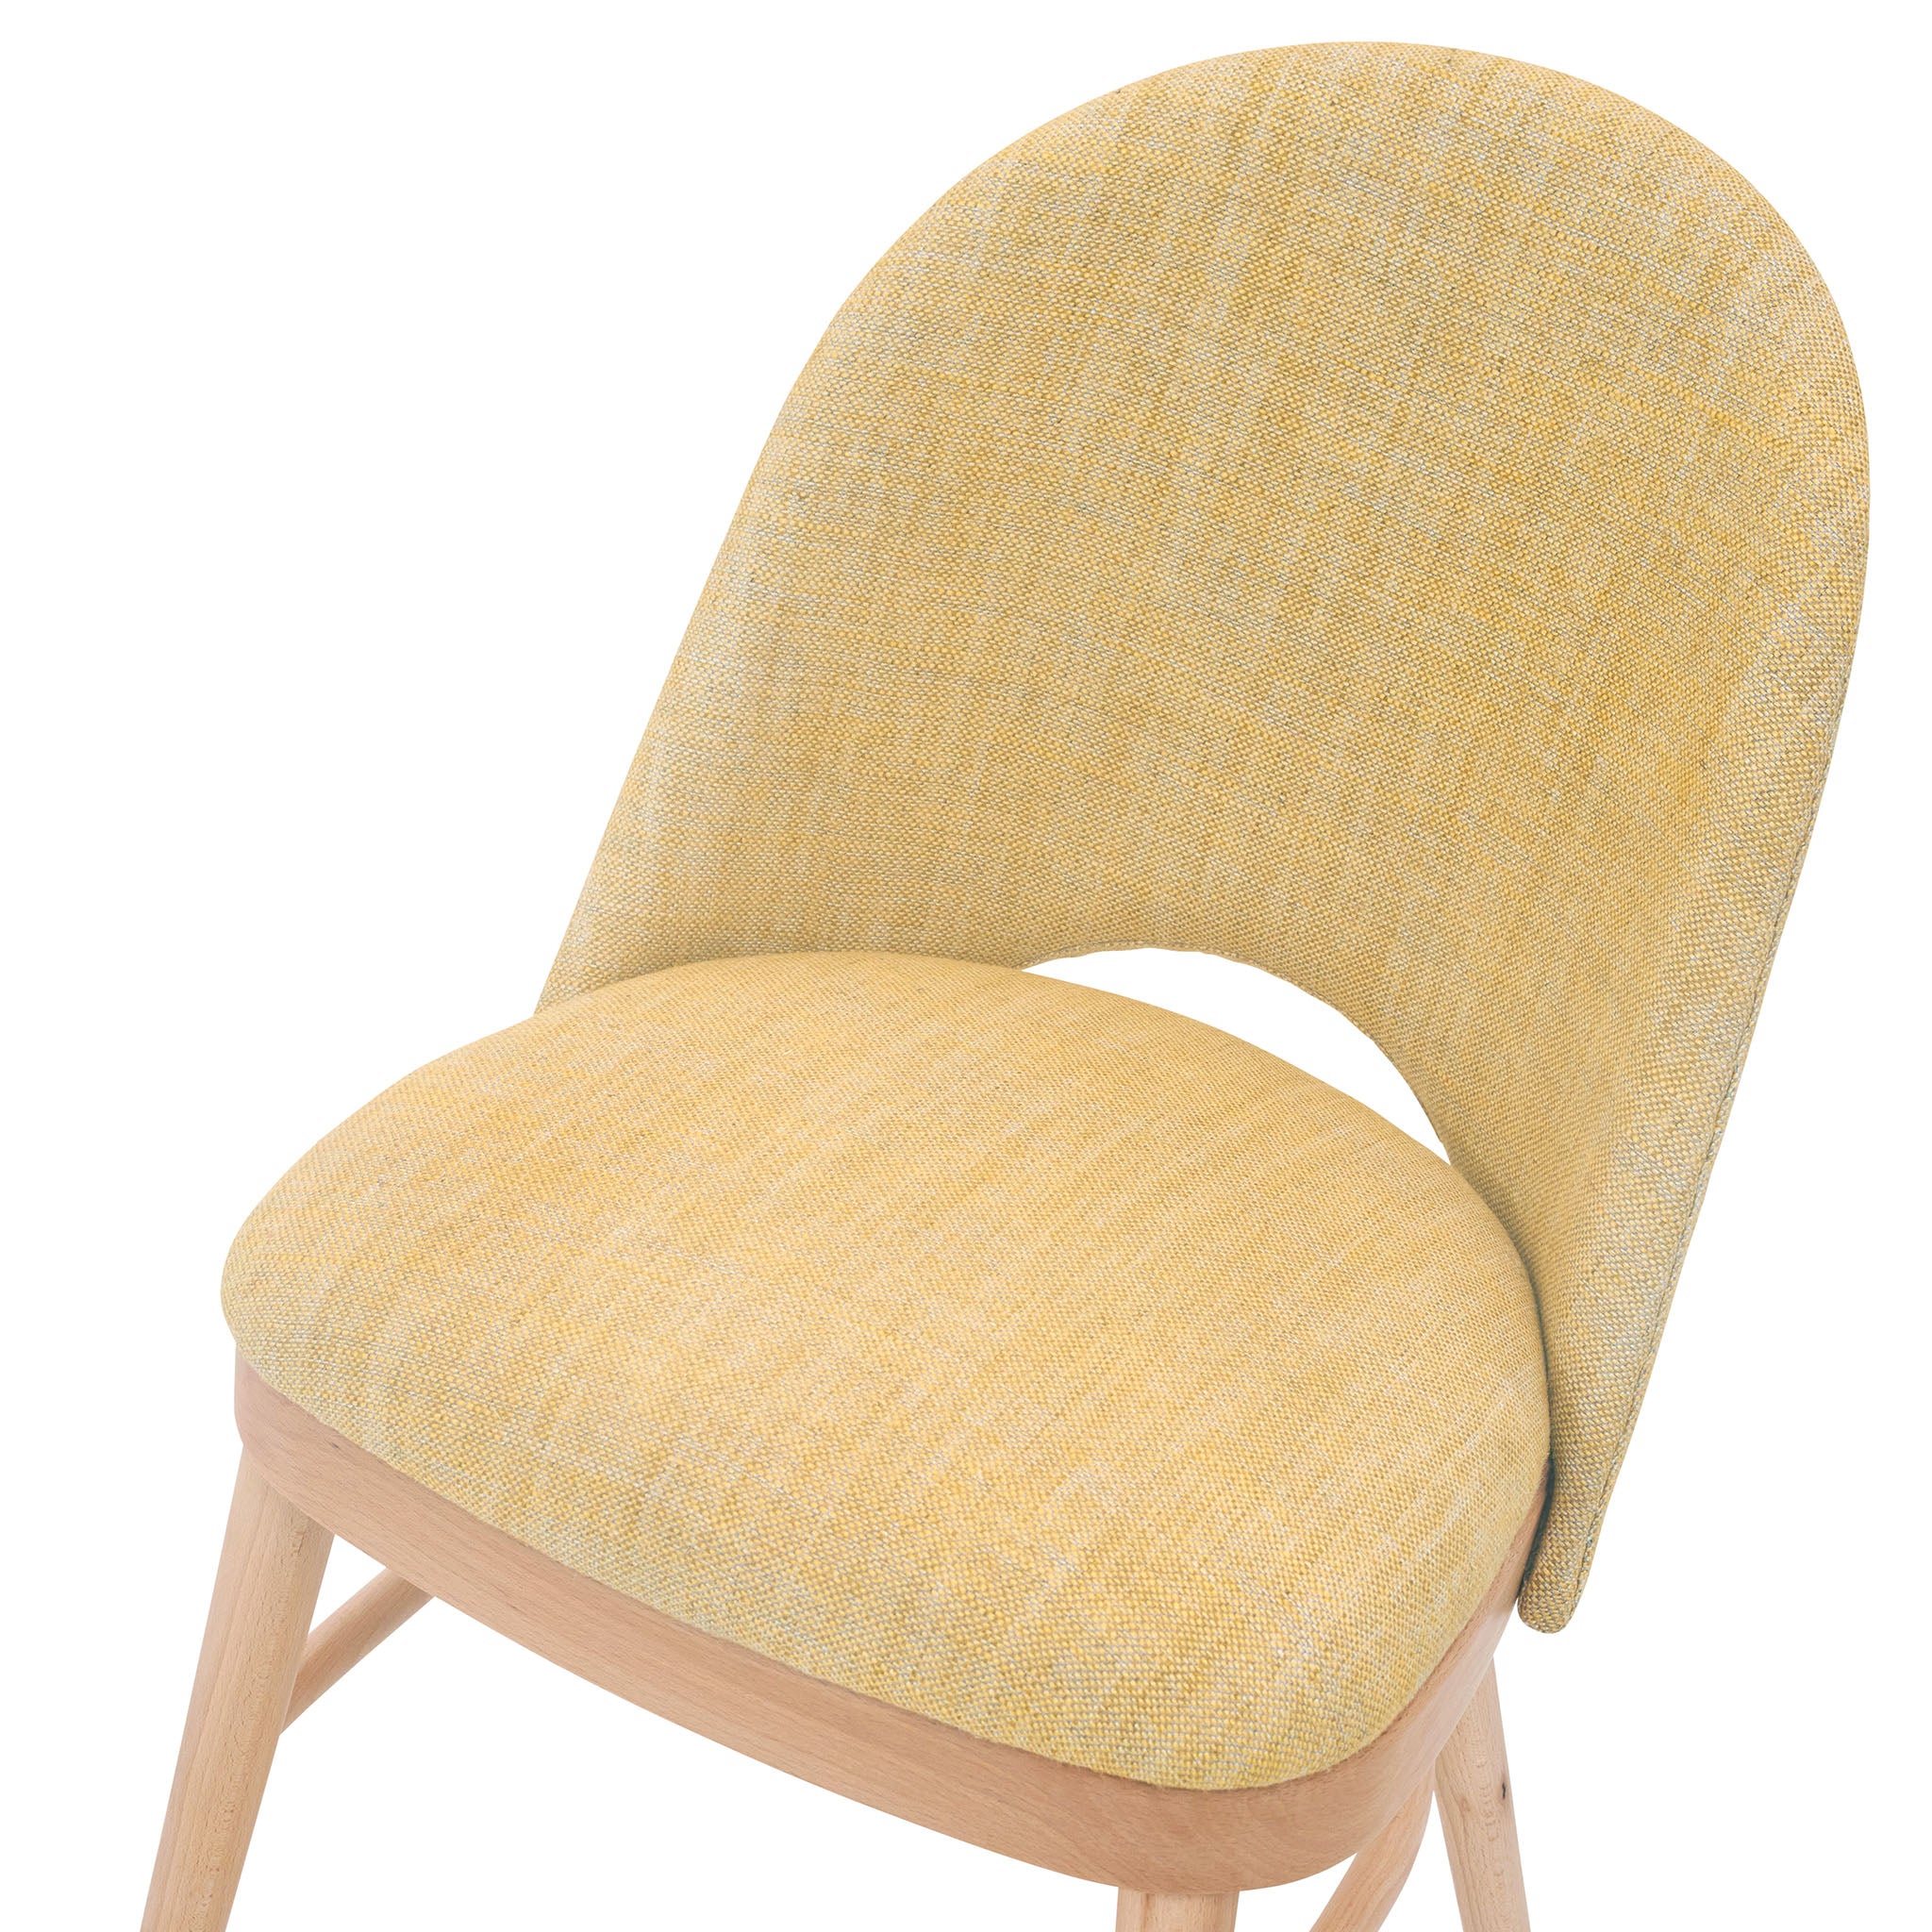 Ella Chair upholstered in Old Guilding from Fermoie